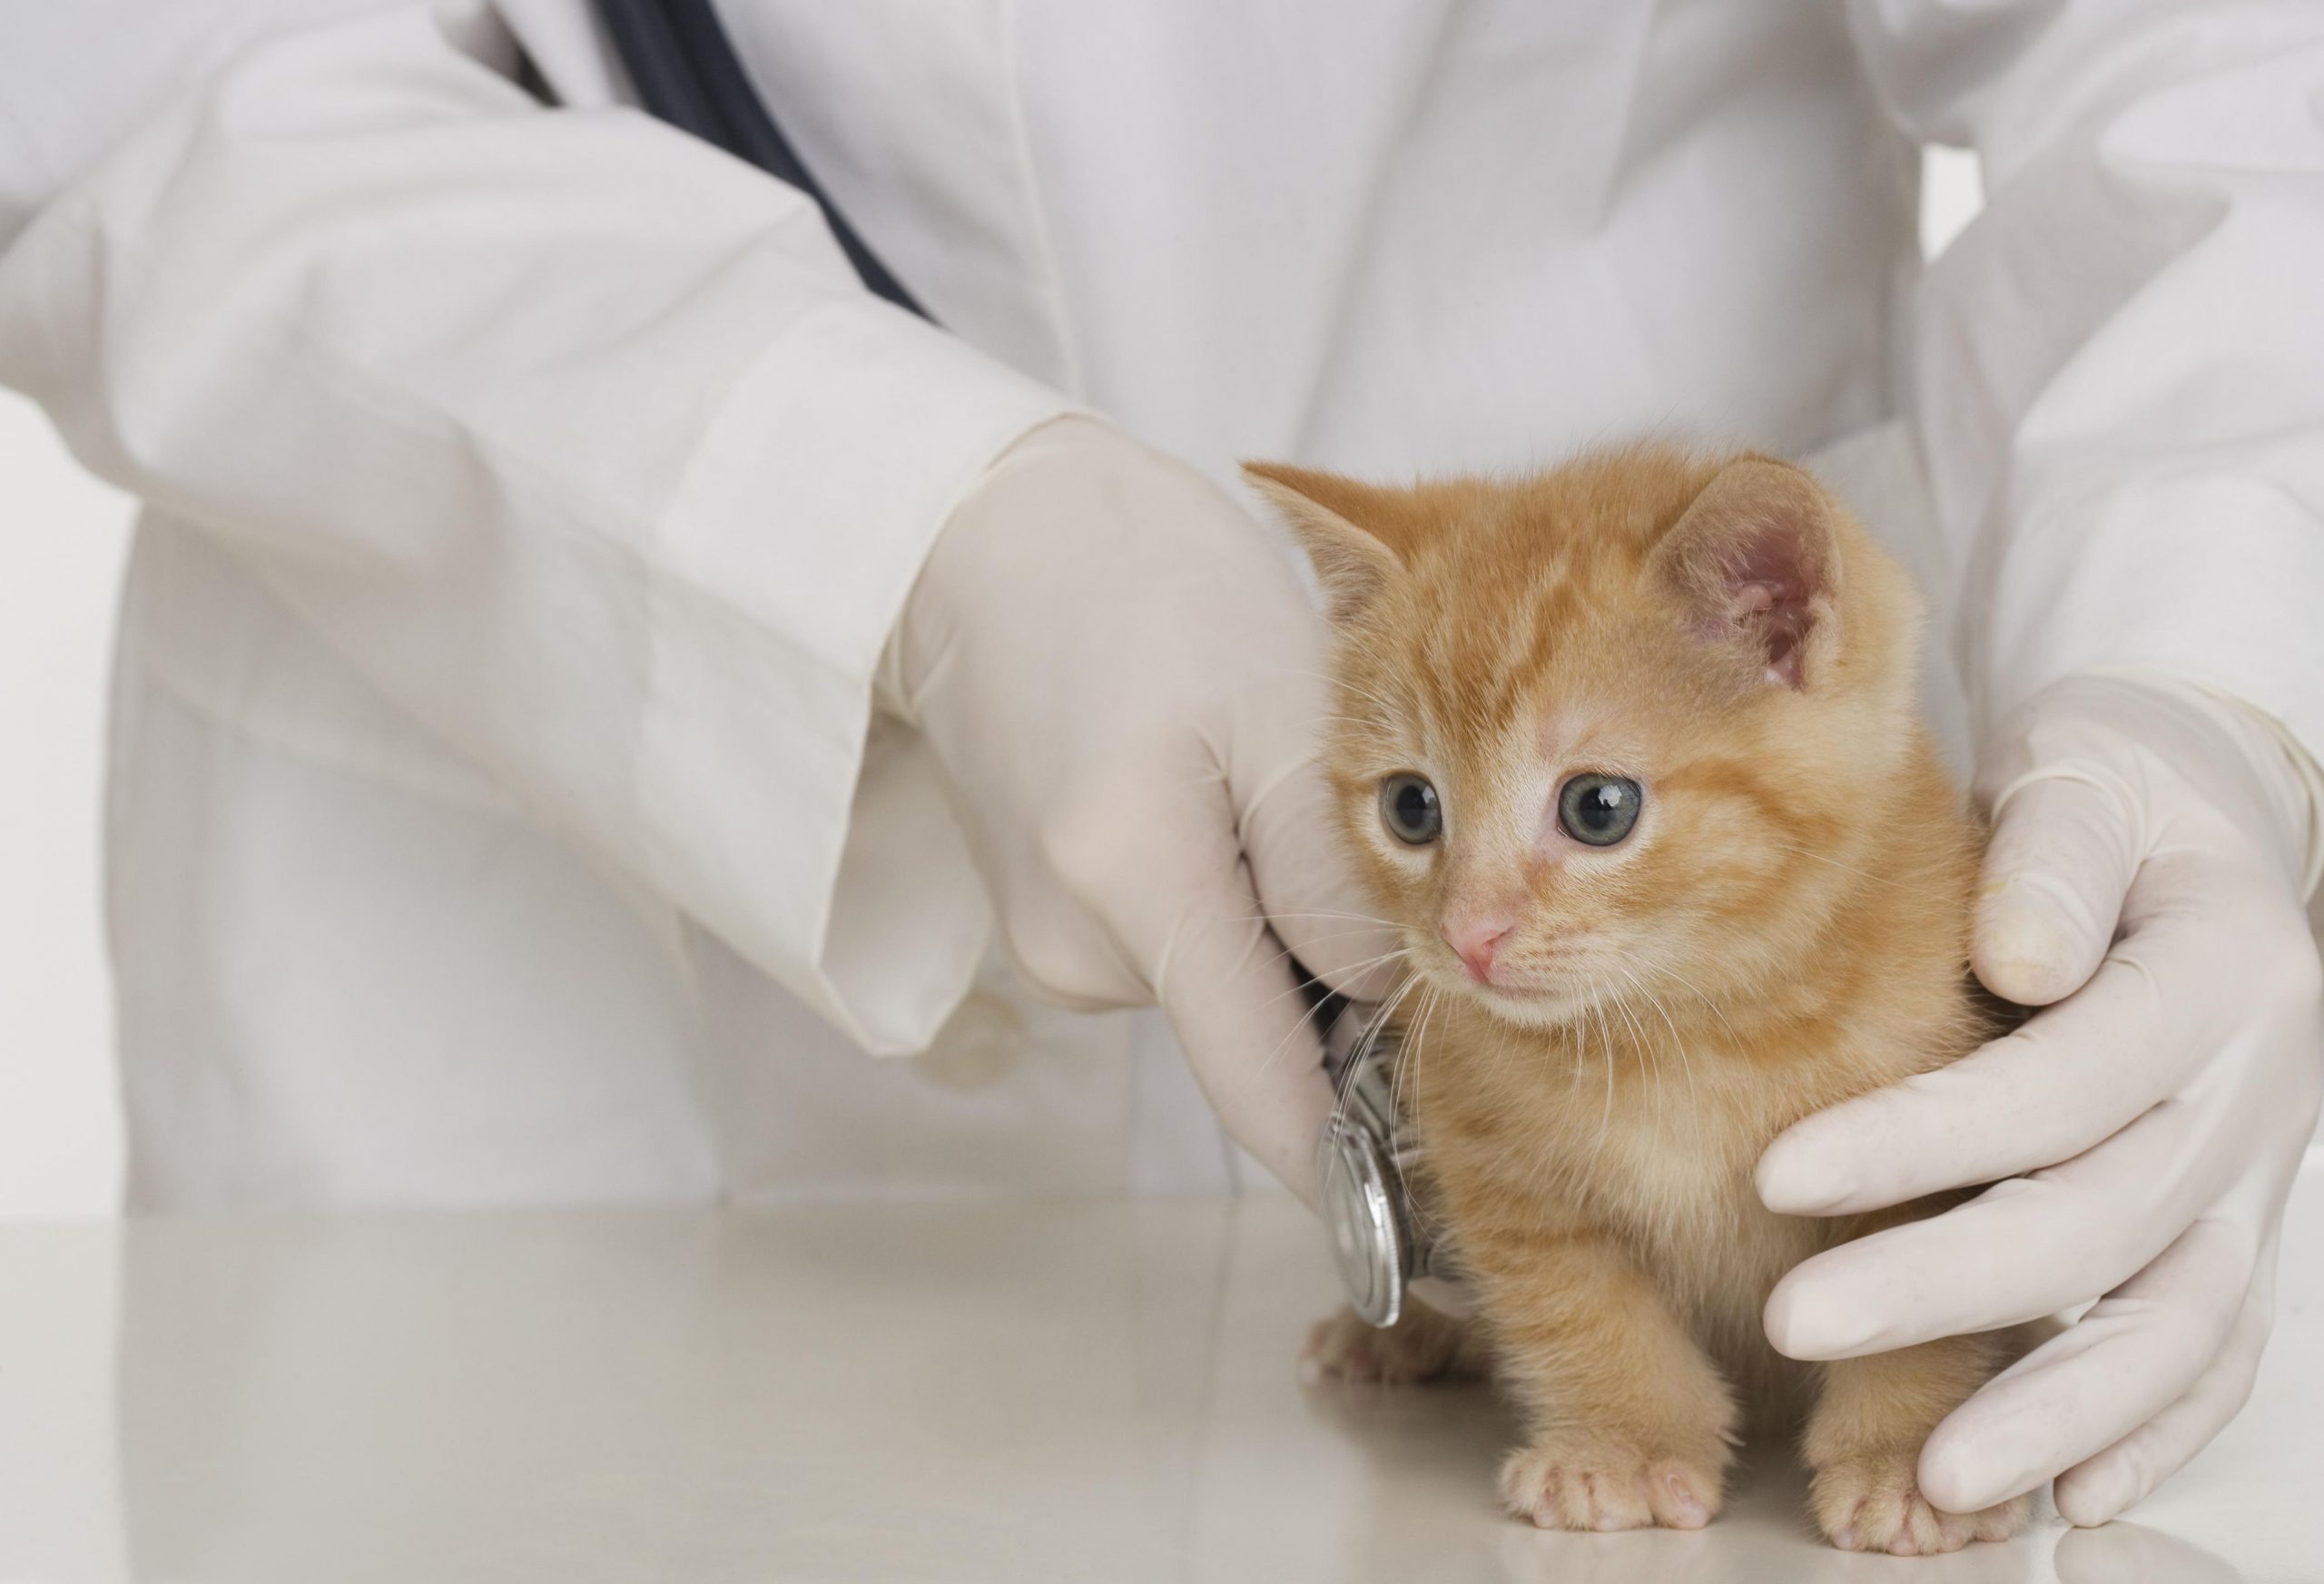 When Should I Take My New Kitten to the Vet?